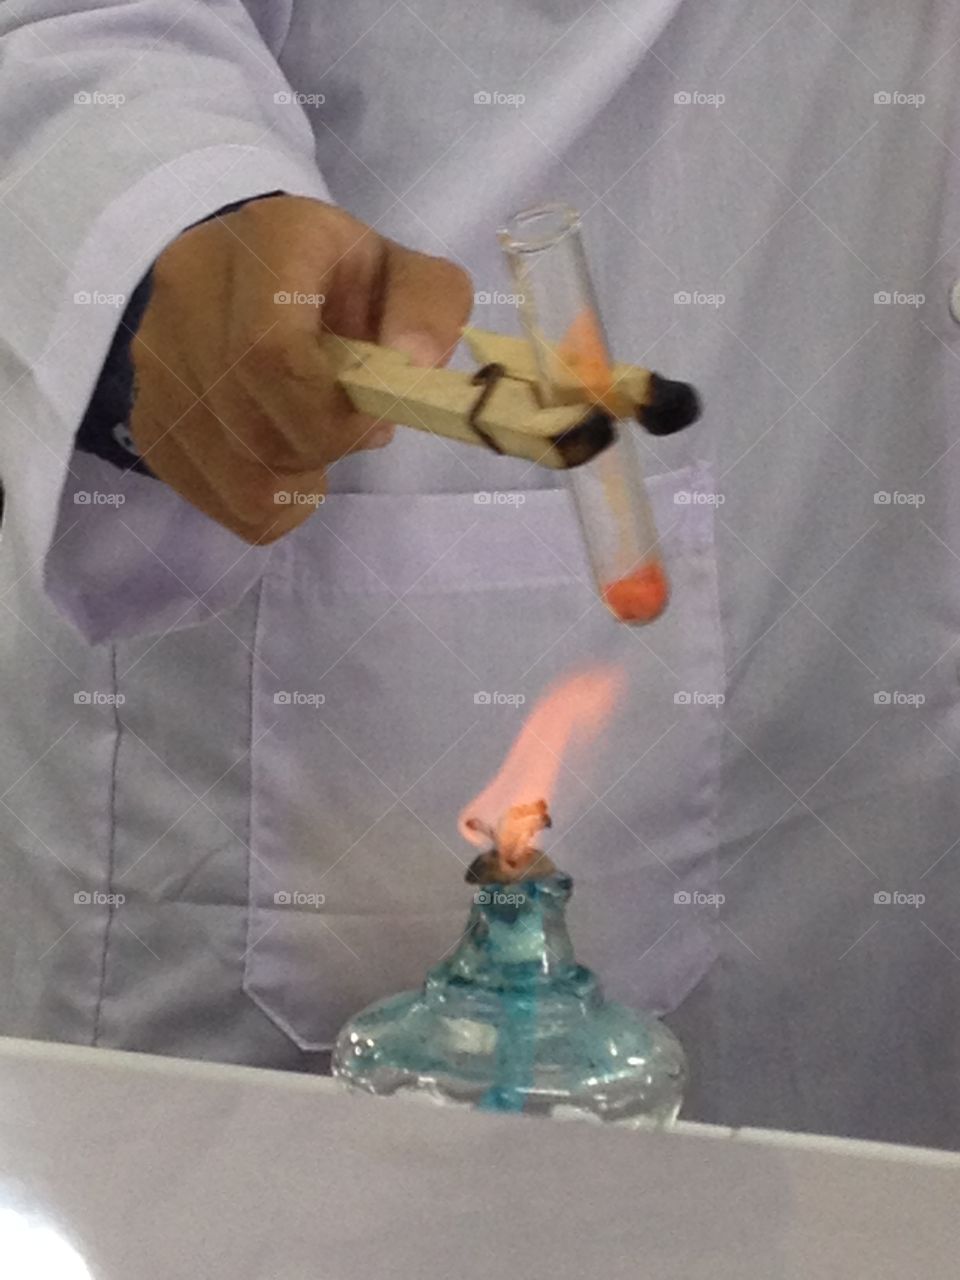 Fire of chemistry